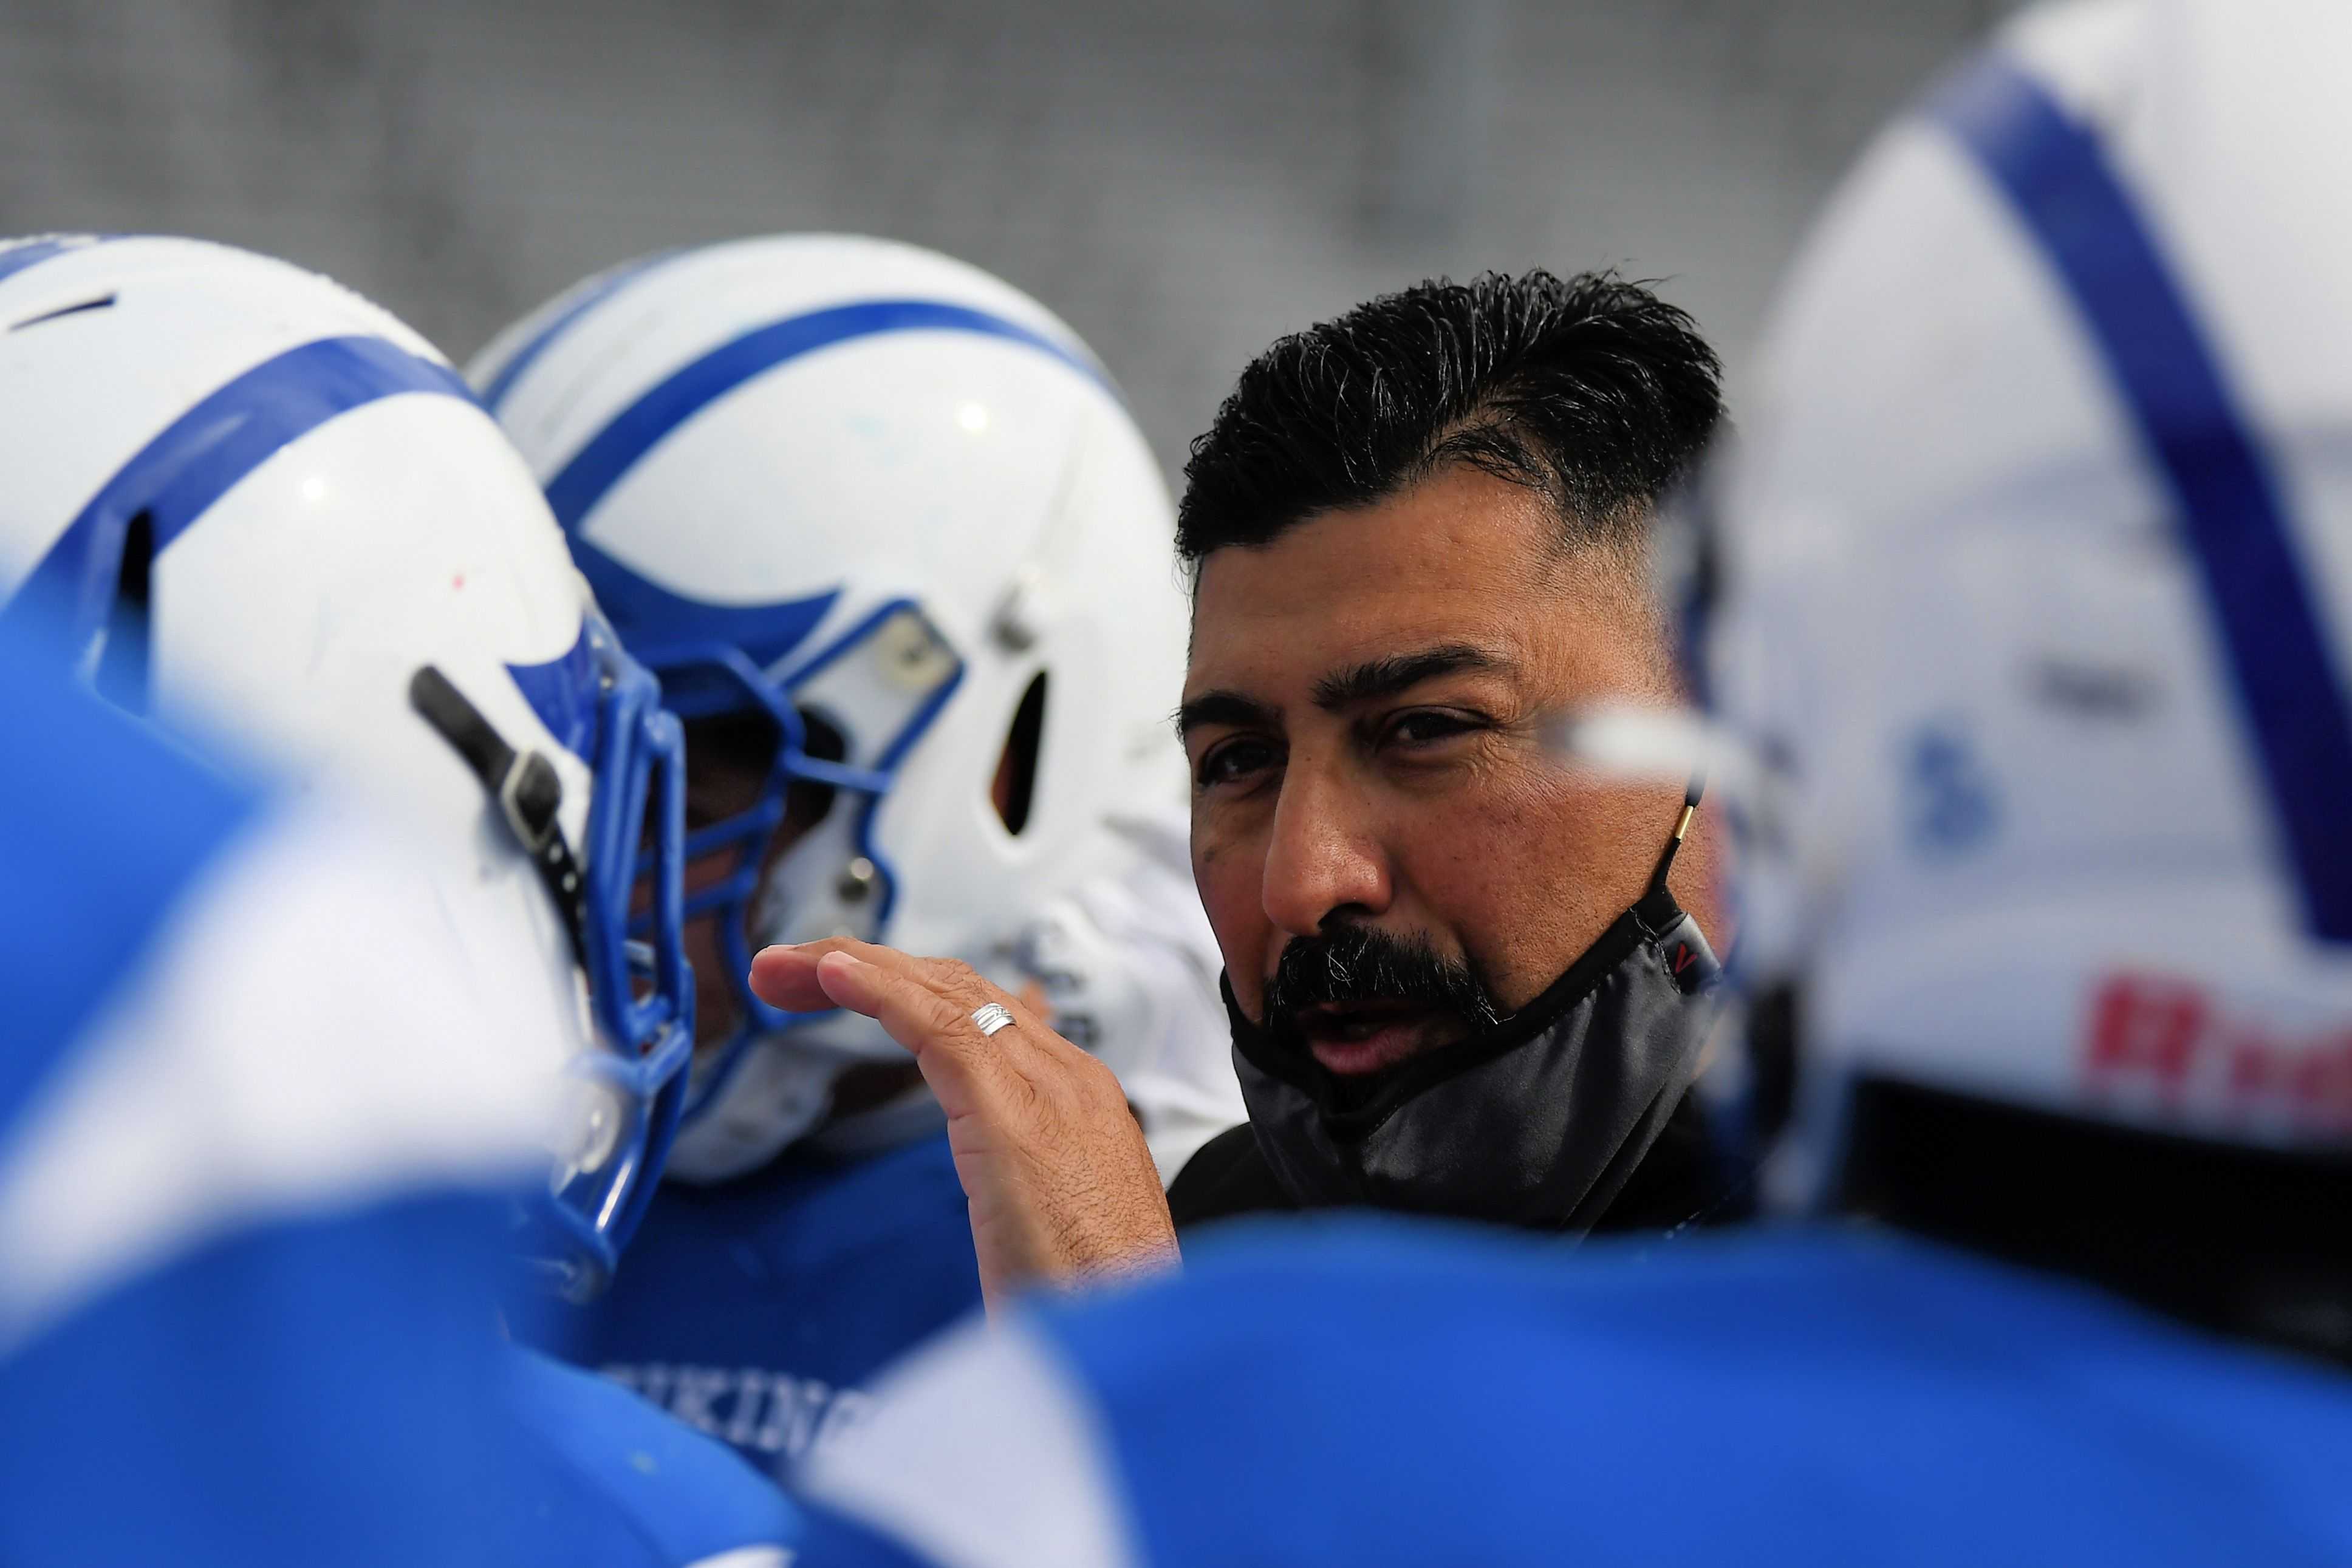 Mazama football coach Vic Lease led his team to the title of the 4A Showcase earlier this year. (Leon Neuschwander/SBLive)